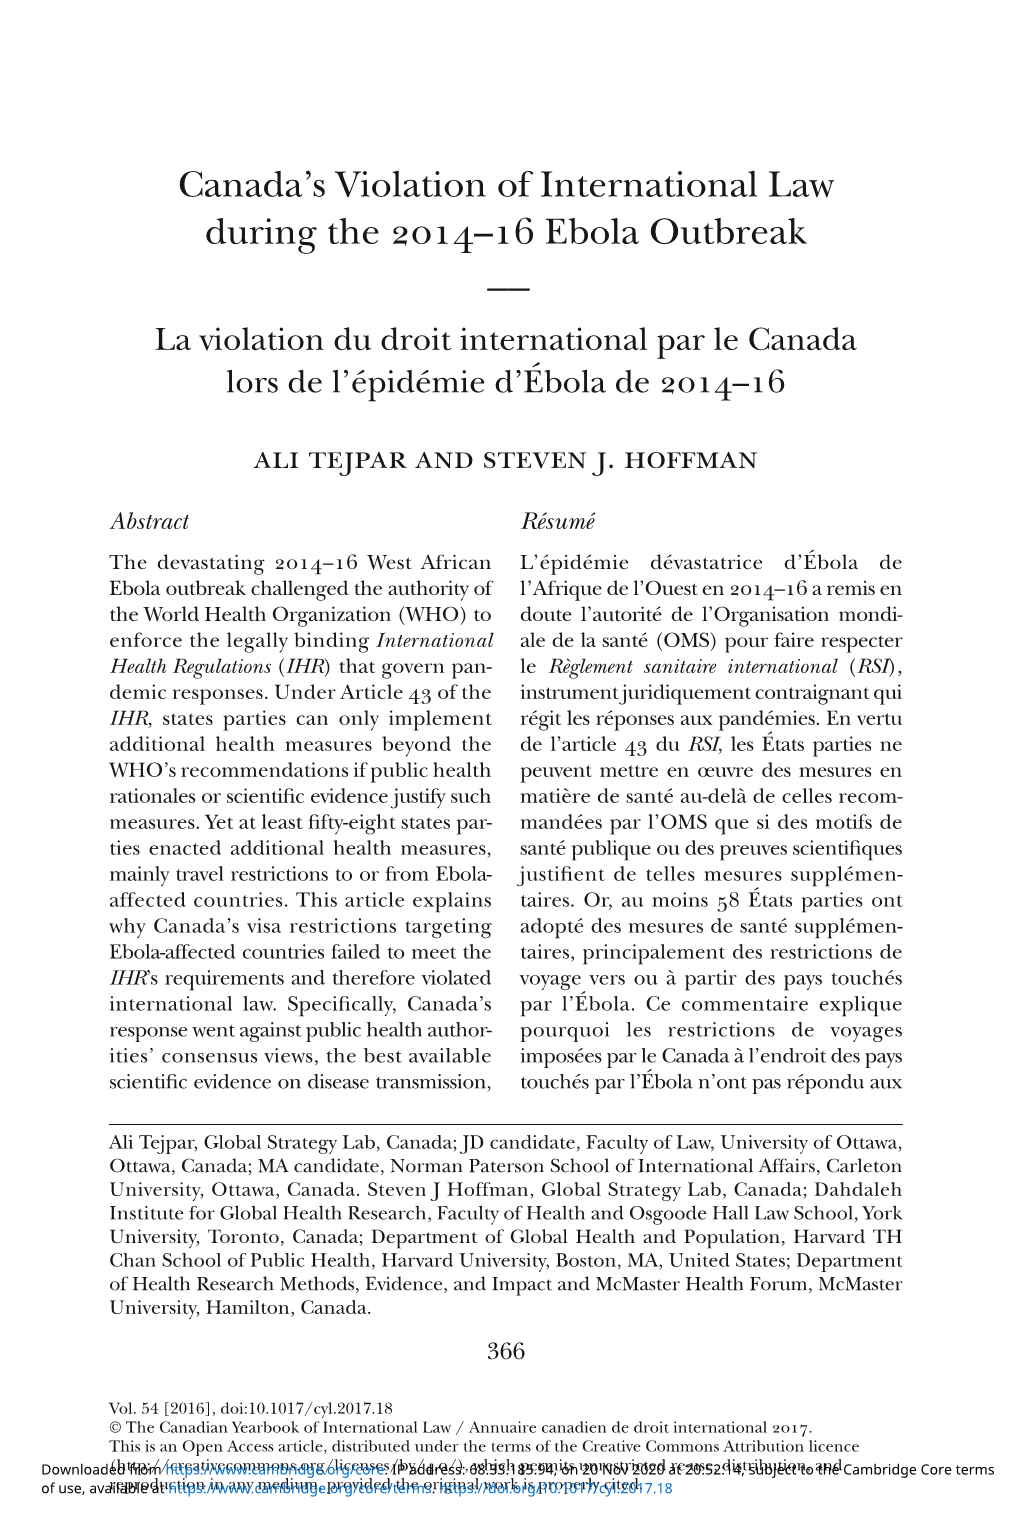 Canada's Violation of International Law During the 2014–16 Ebola